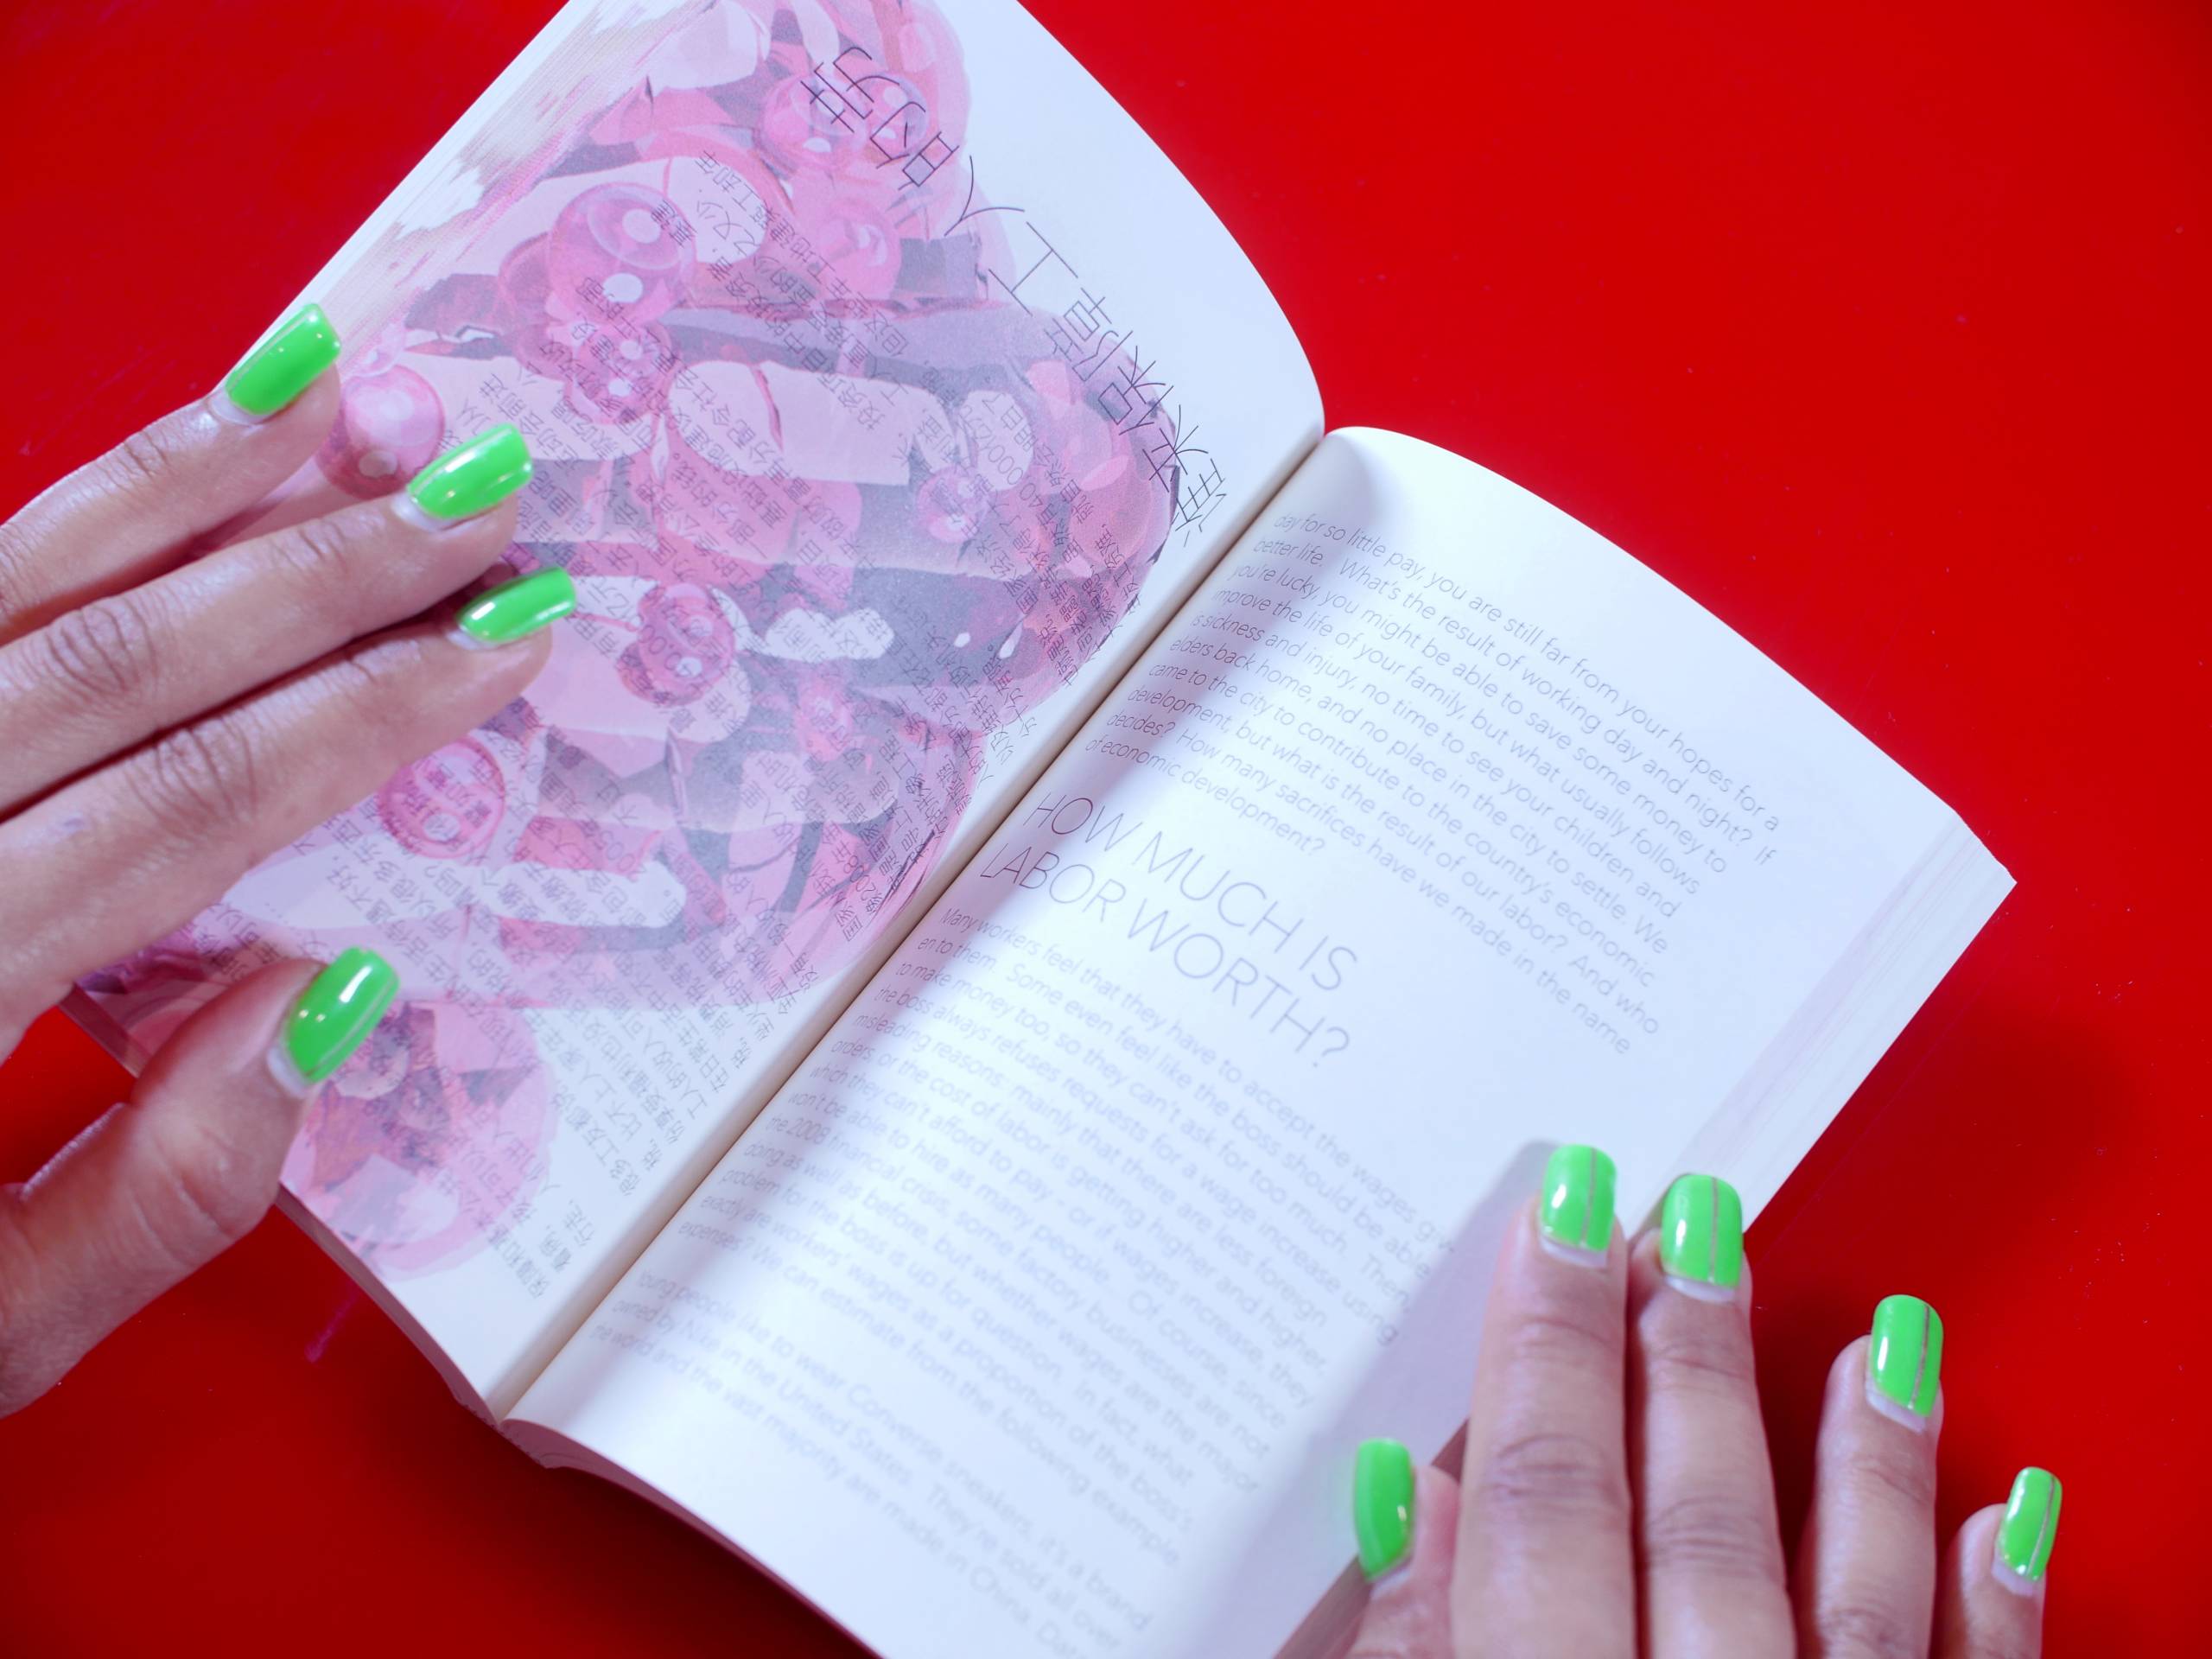 Two hands with green nails hold open a book against red surface